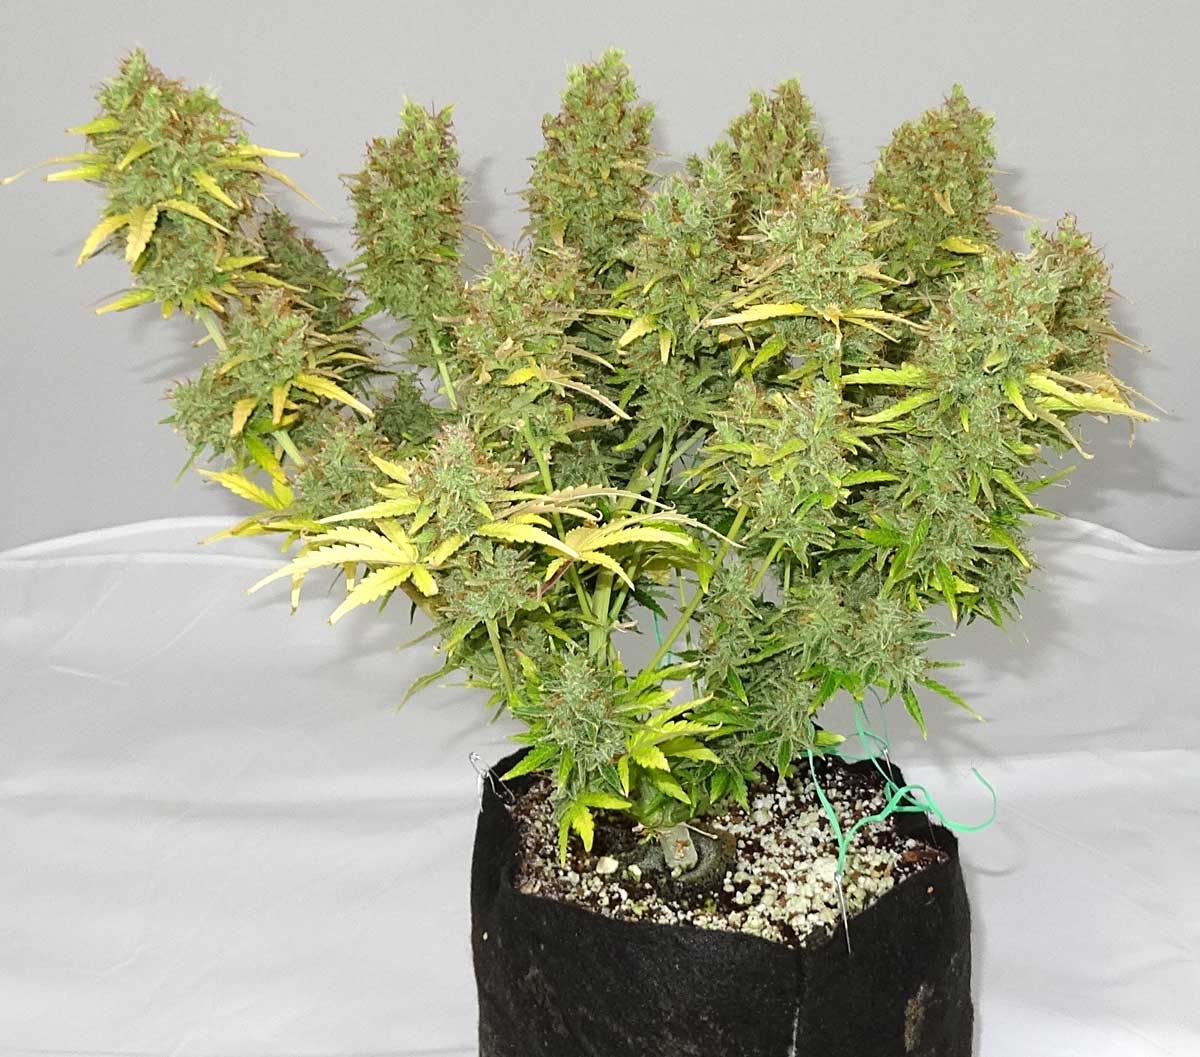 Example of an auto-flowering plant that is only 3 months from seed